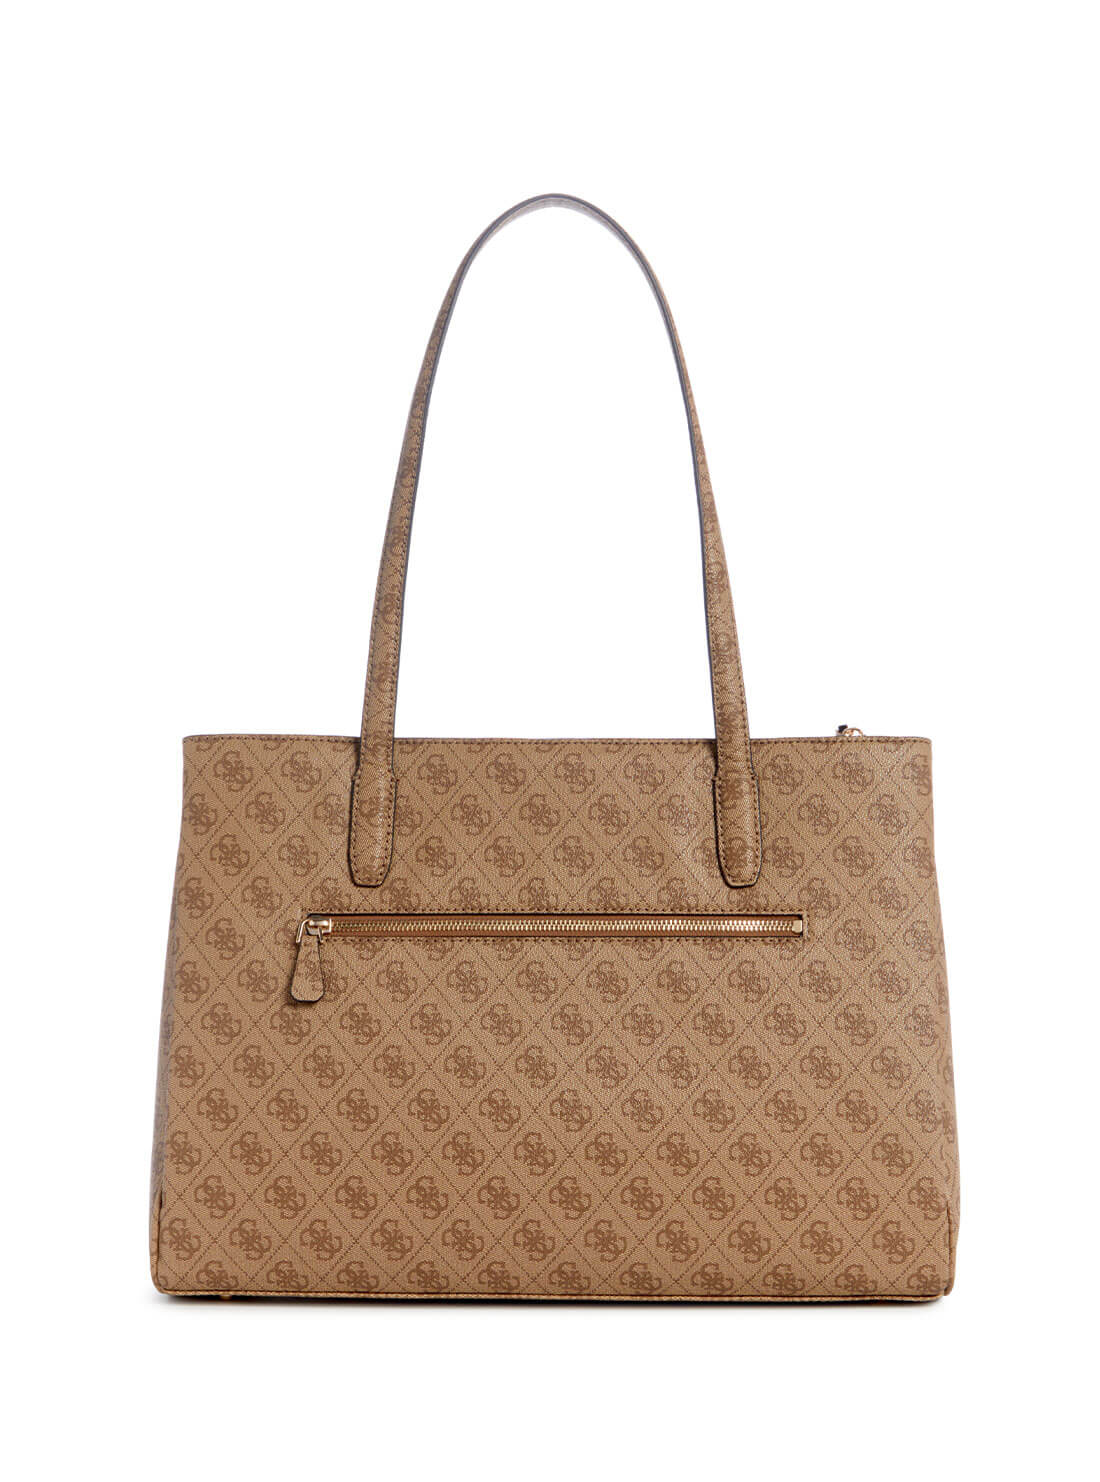 GUESS Beige Brown Logo Power Play Tote Bag back view